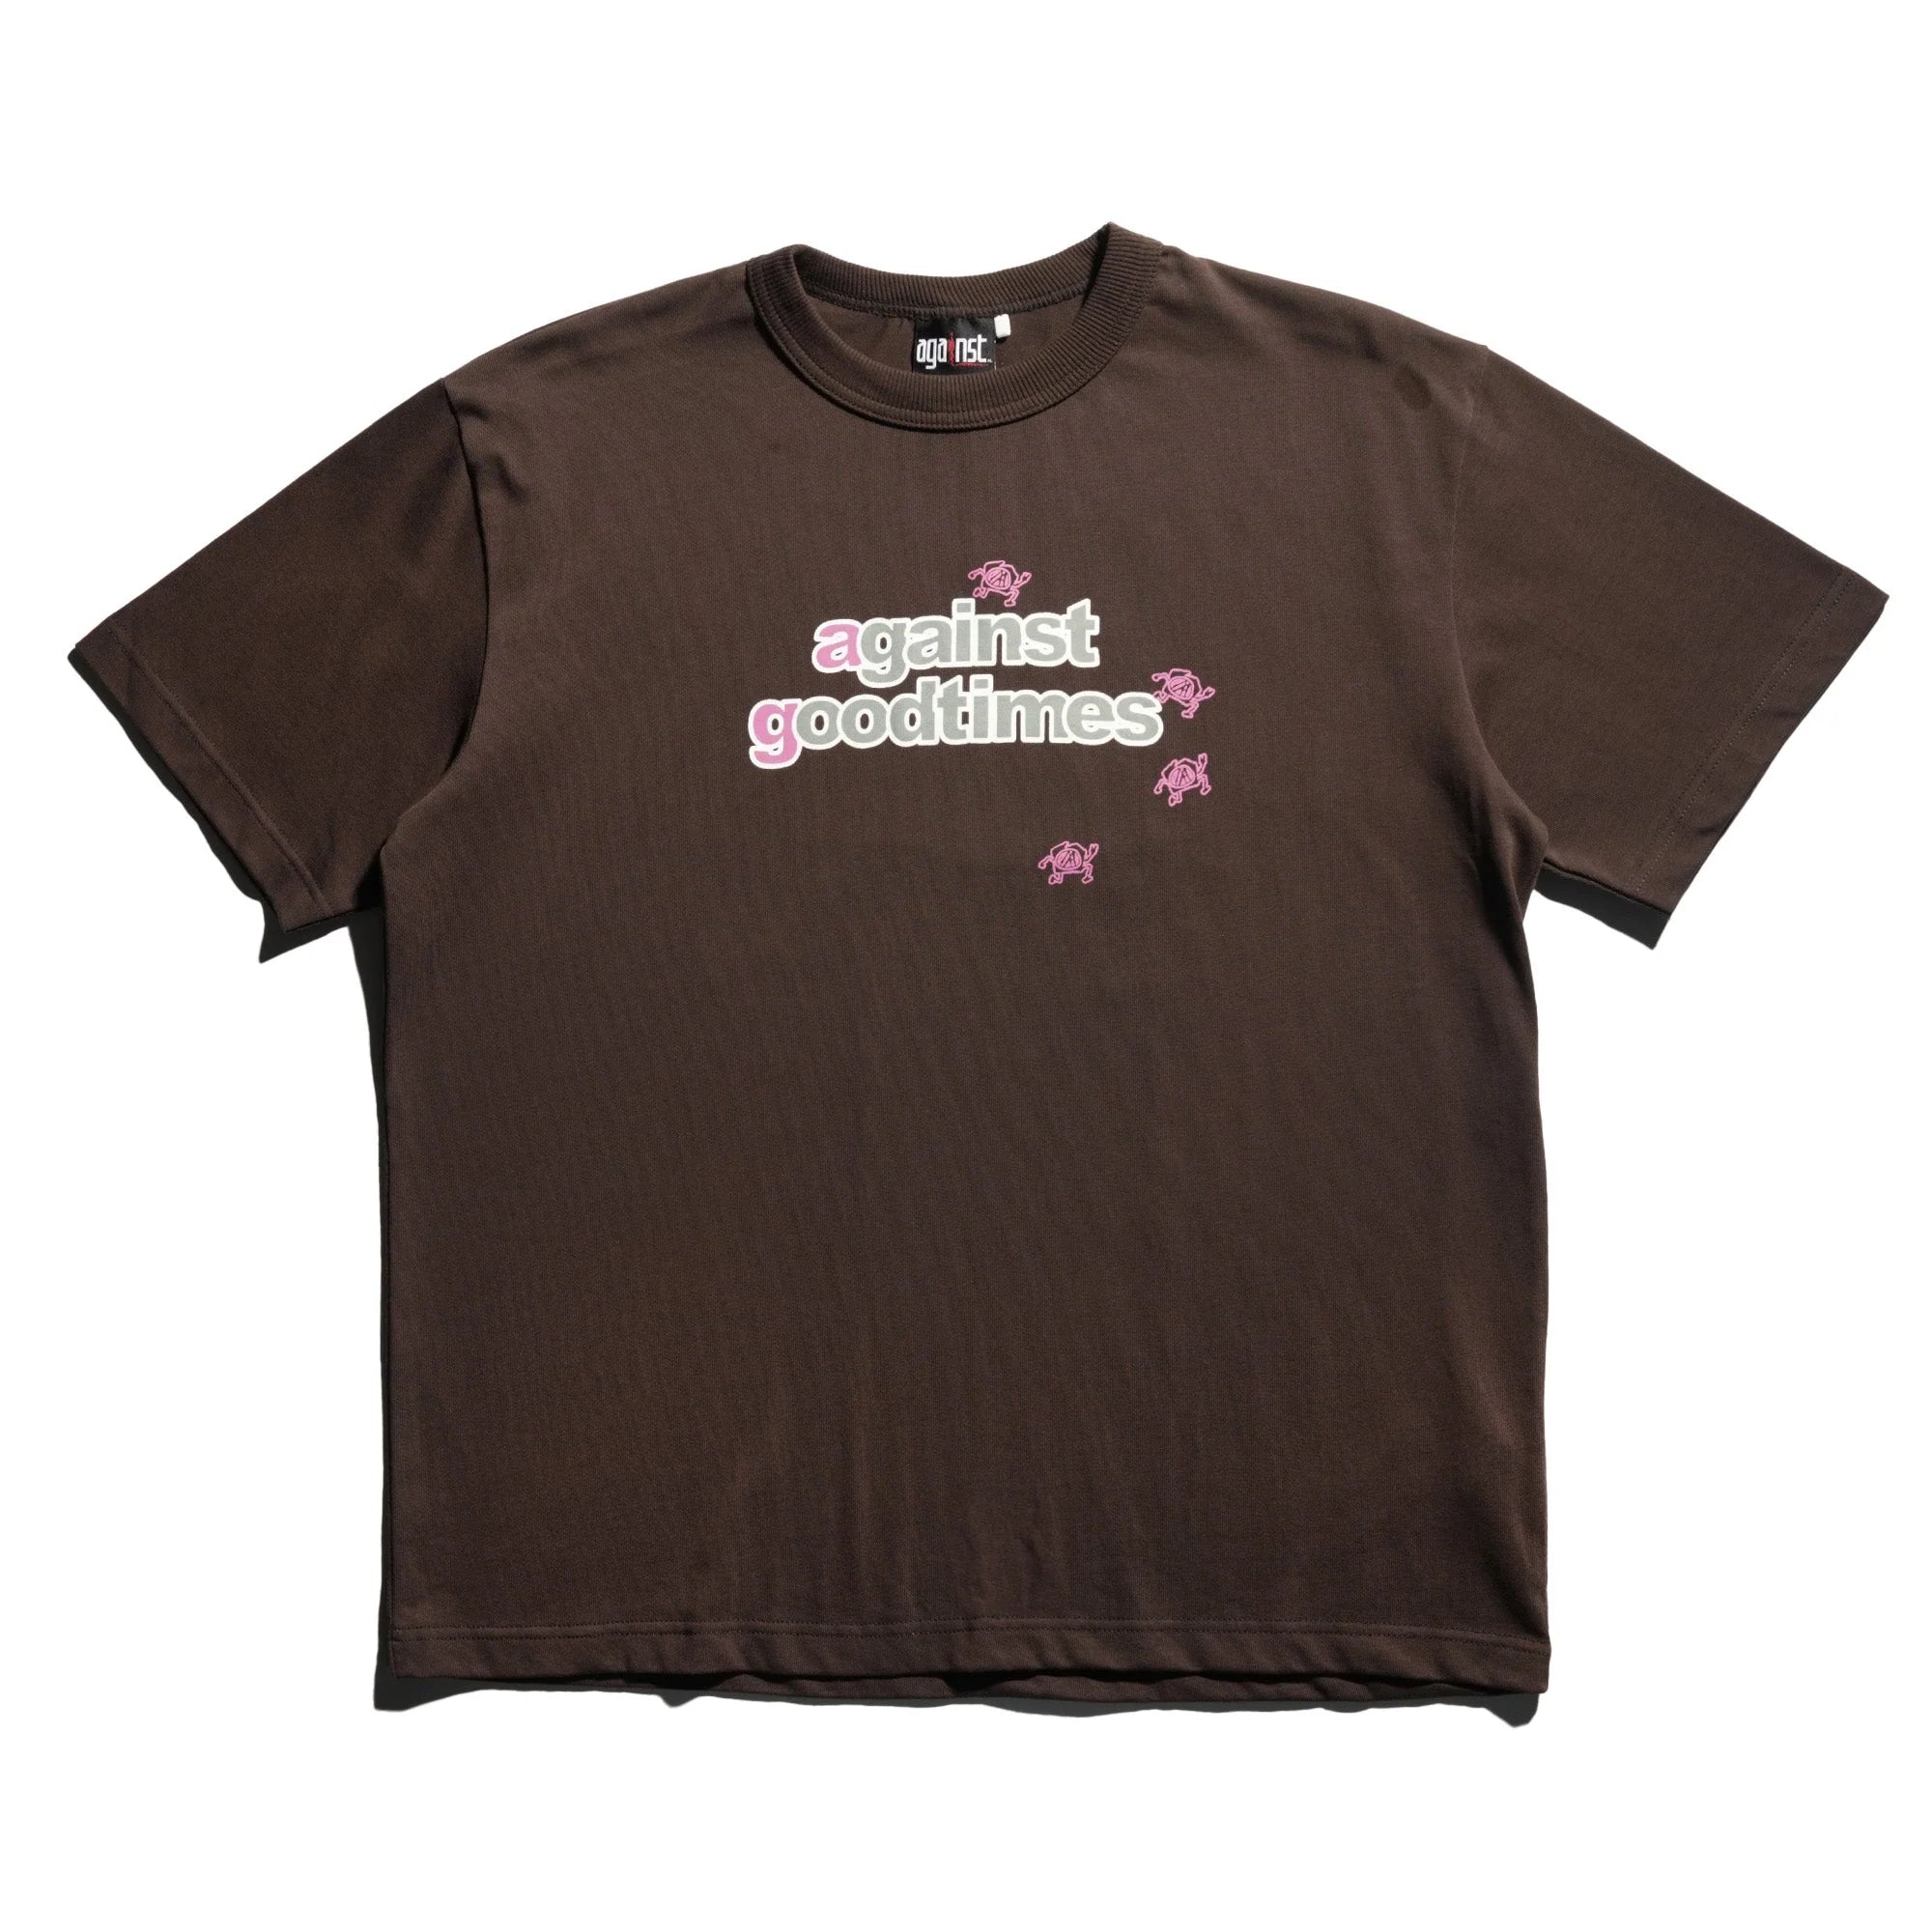 Against Lab x Good Times Quote Tee Dark Brown